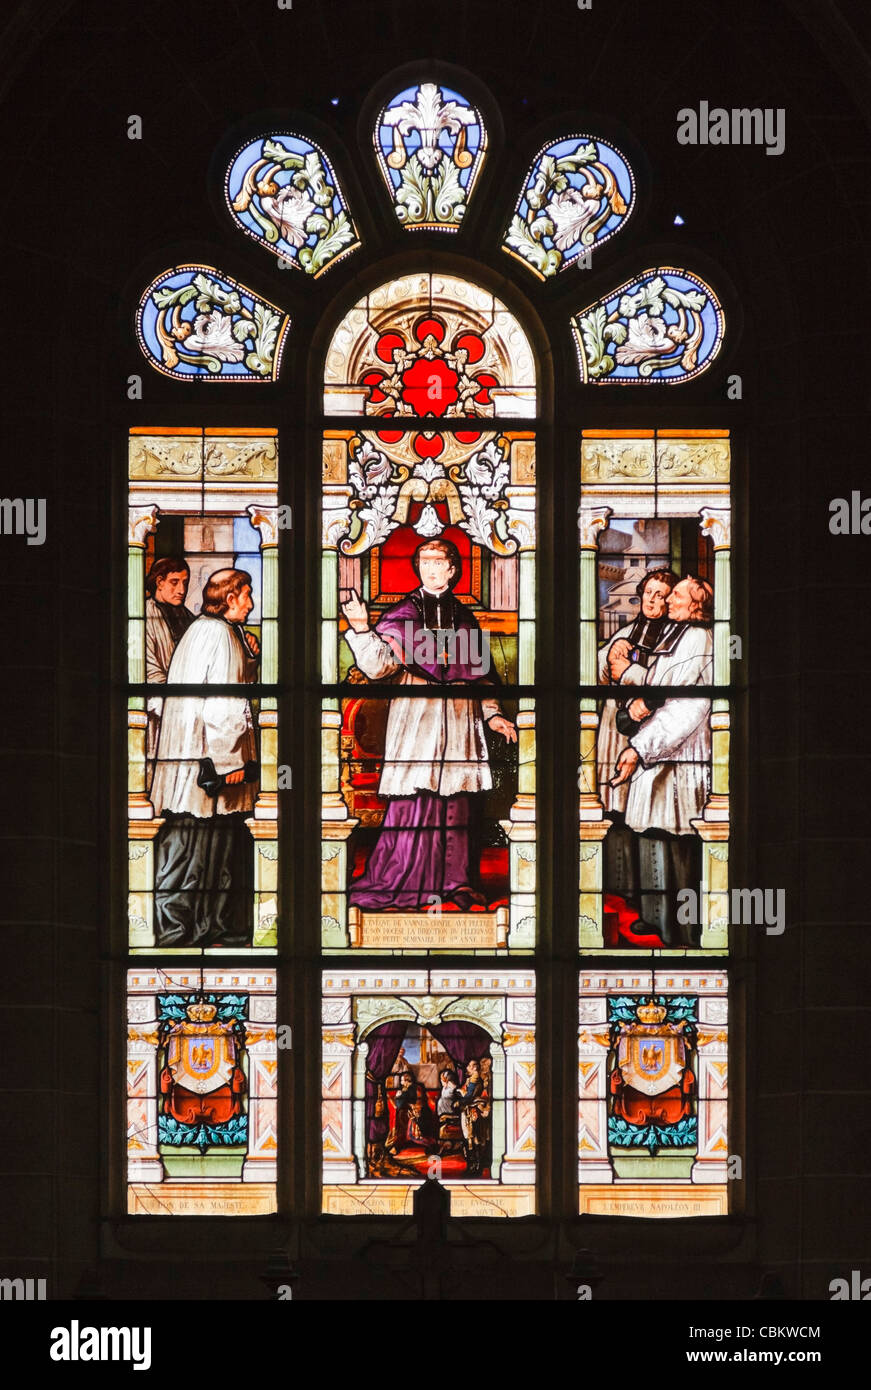 Stained glass window in the Basilica at St Anne dAuray, Morbihan, Brittany, France Stock Photo